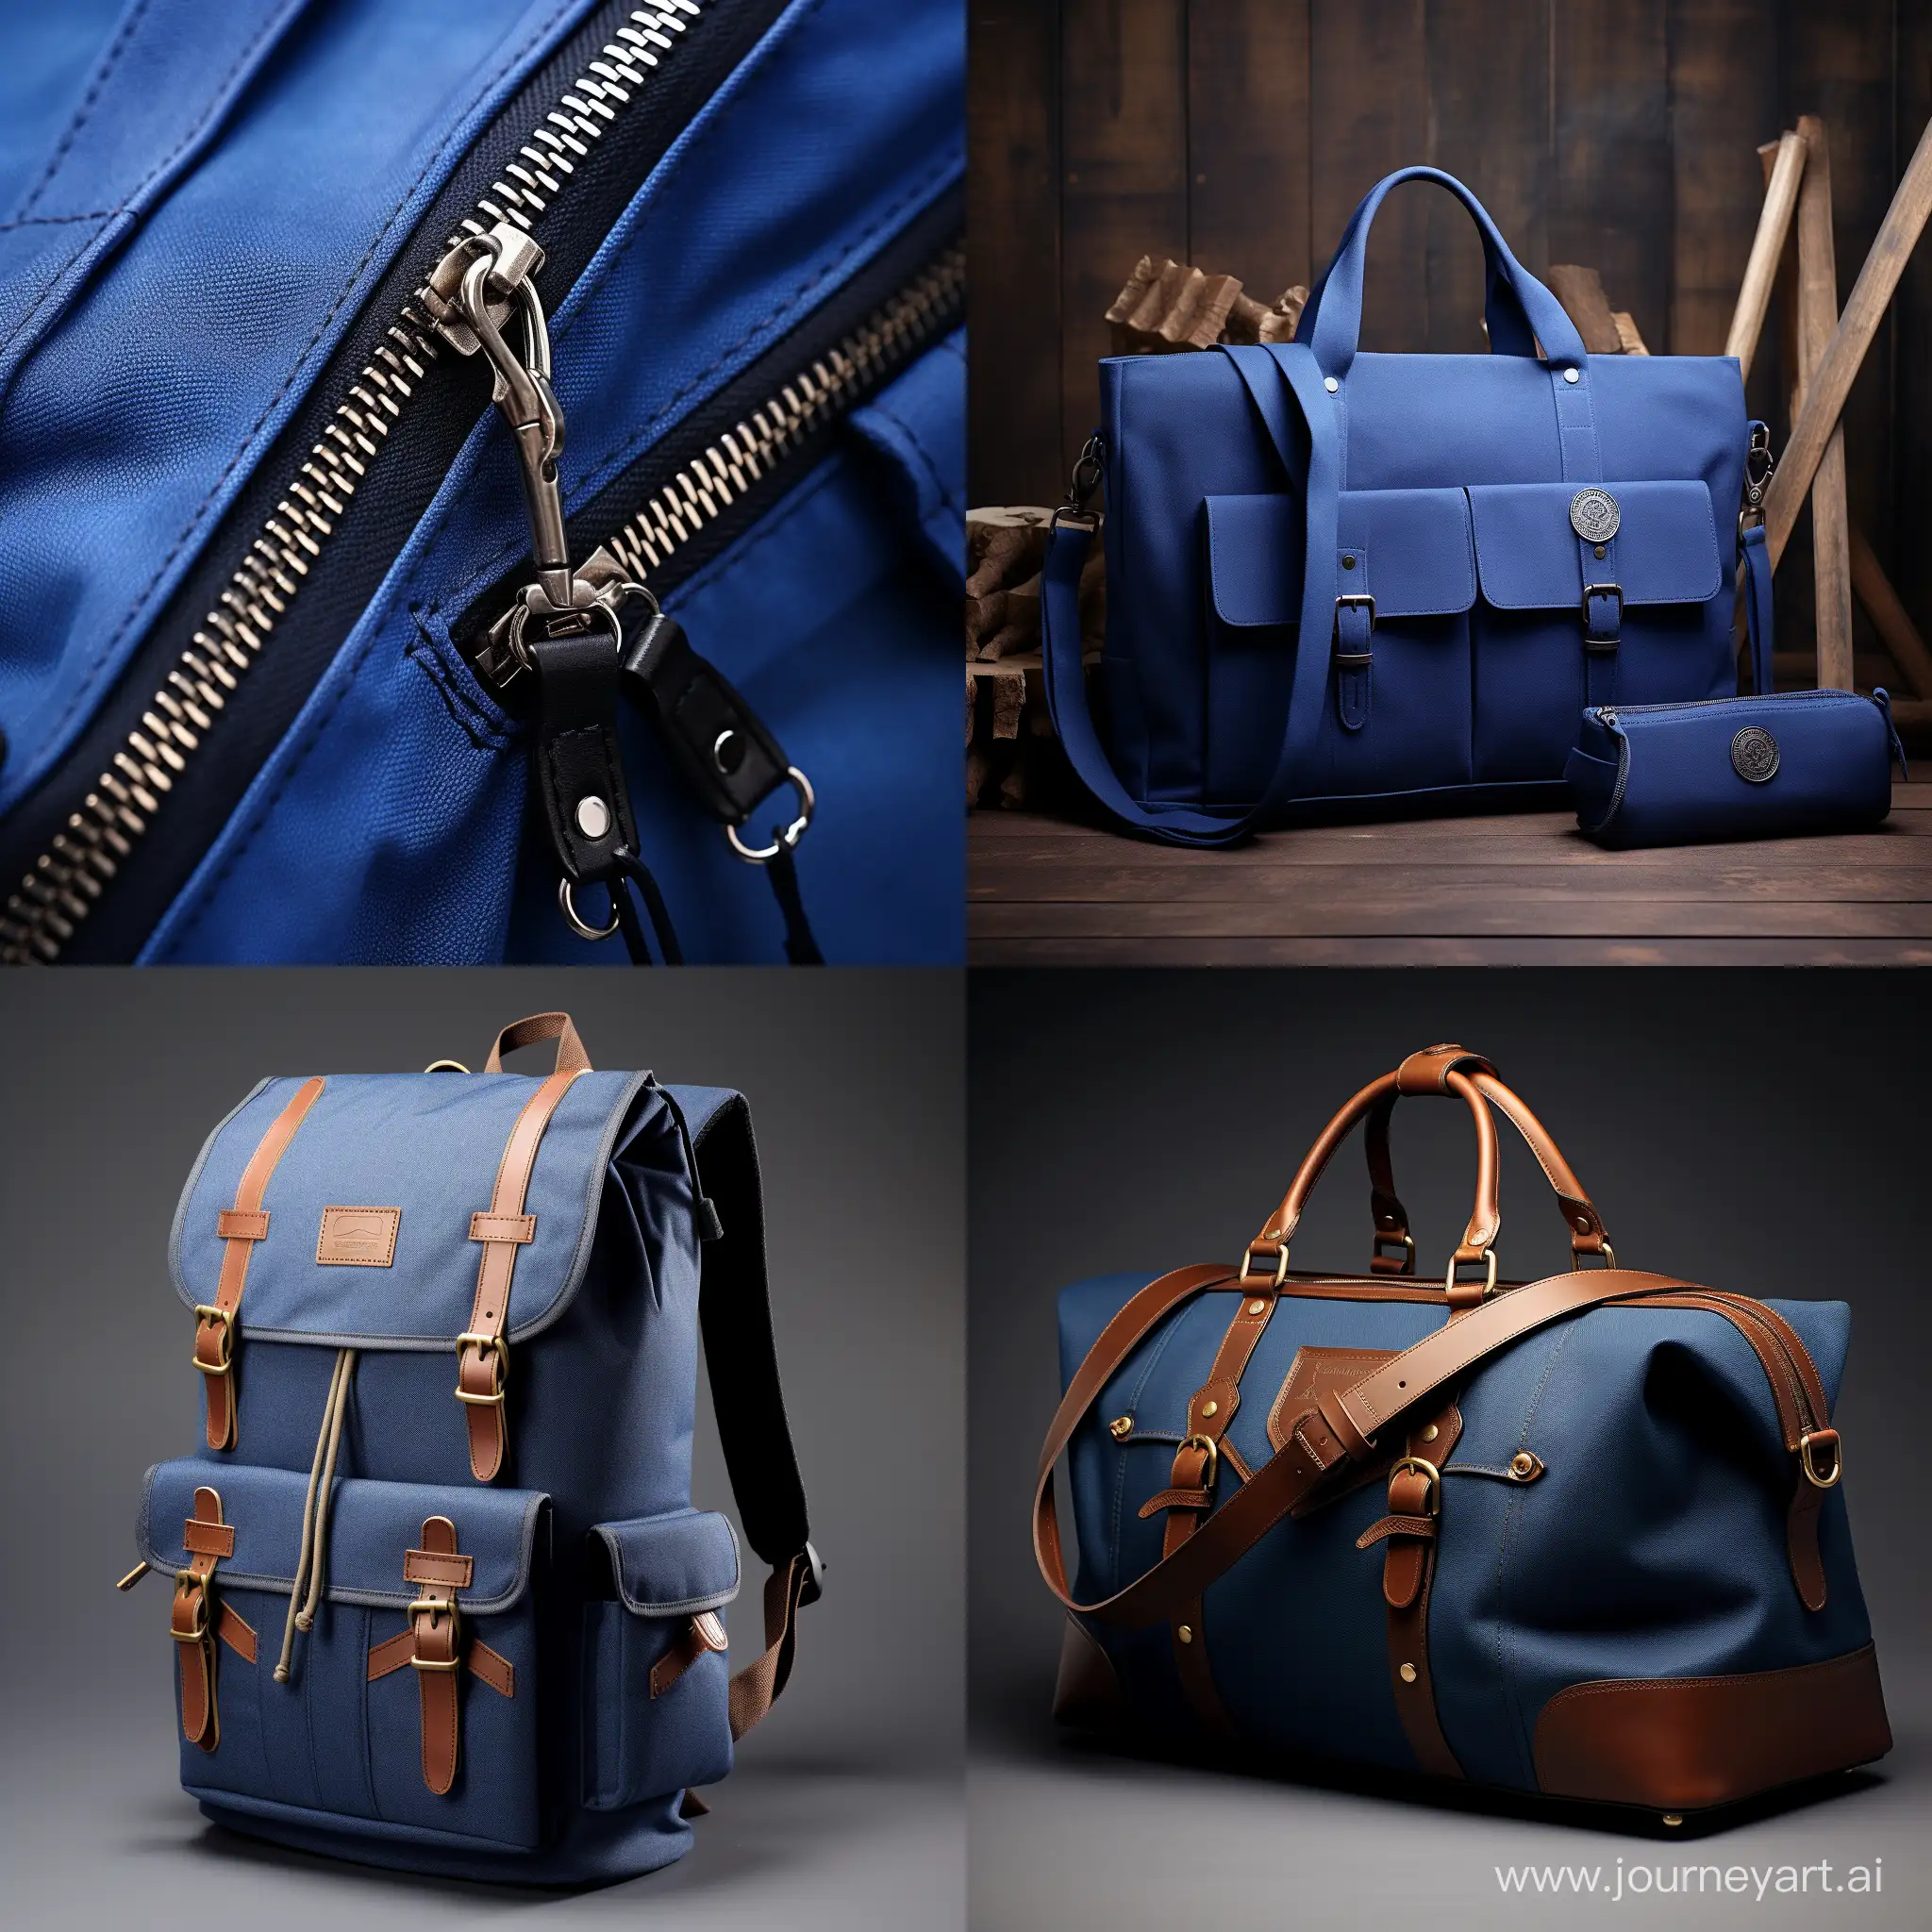 HAO-Hardware-Deep-Blue-Canvas-Bag-with-Quality-Hardware-Products